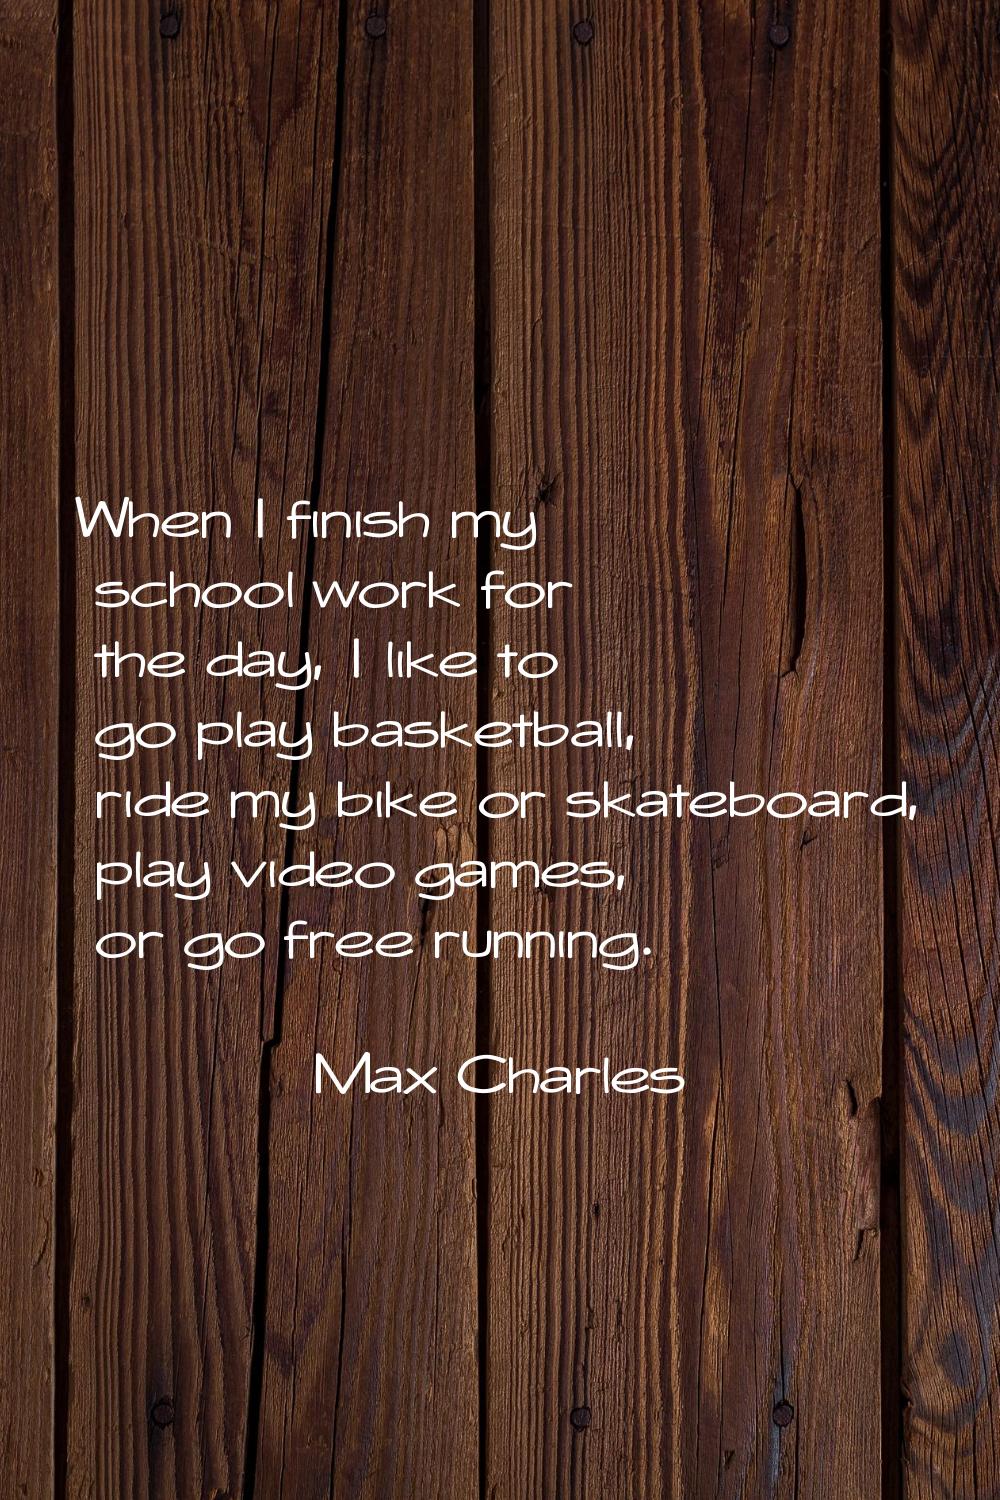 When I finish my school work for the day, I like to go play basketball, ride my bike or skateboard,